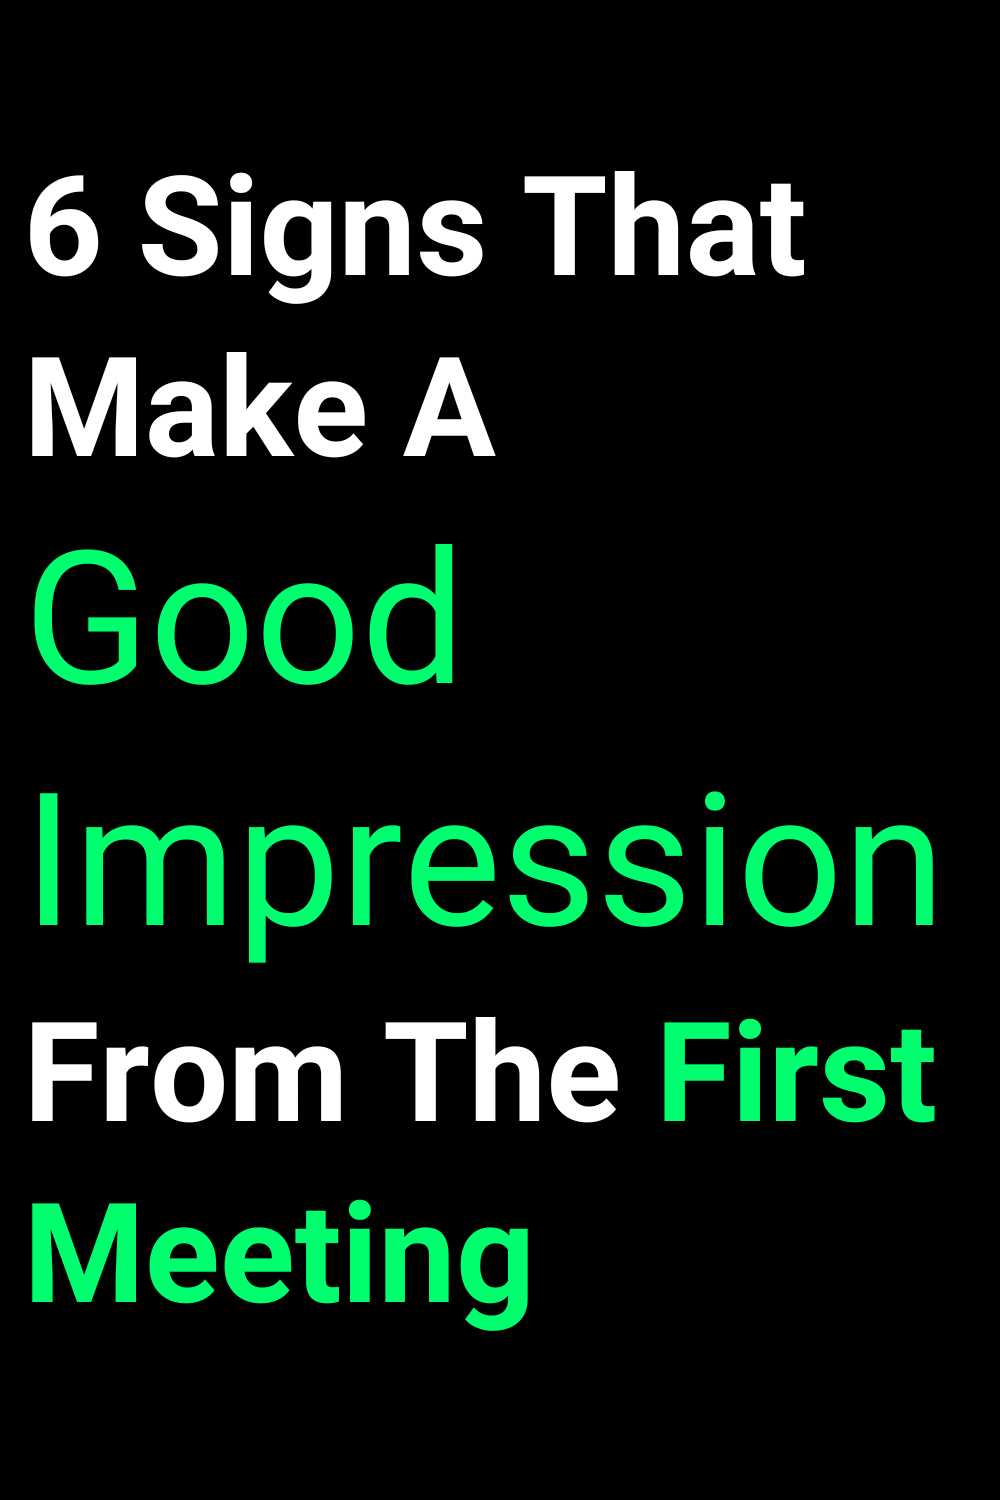 6 Signs That Make A Good Impression From The First Meeting